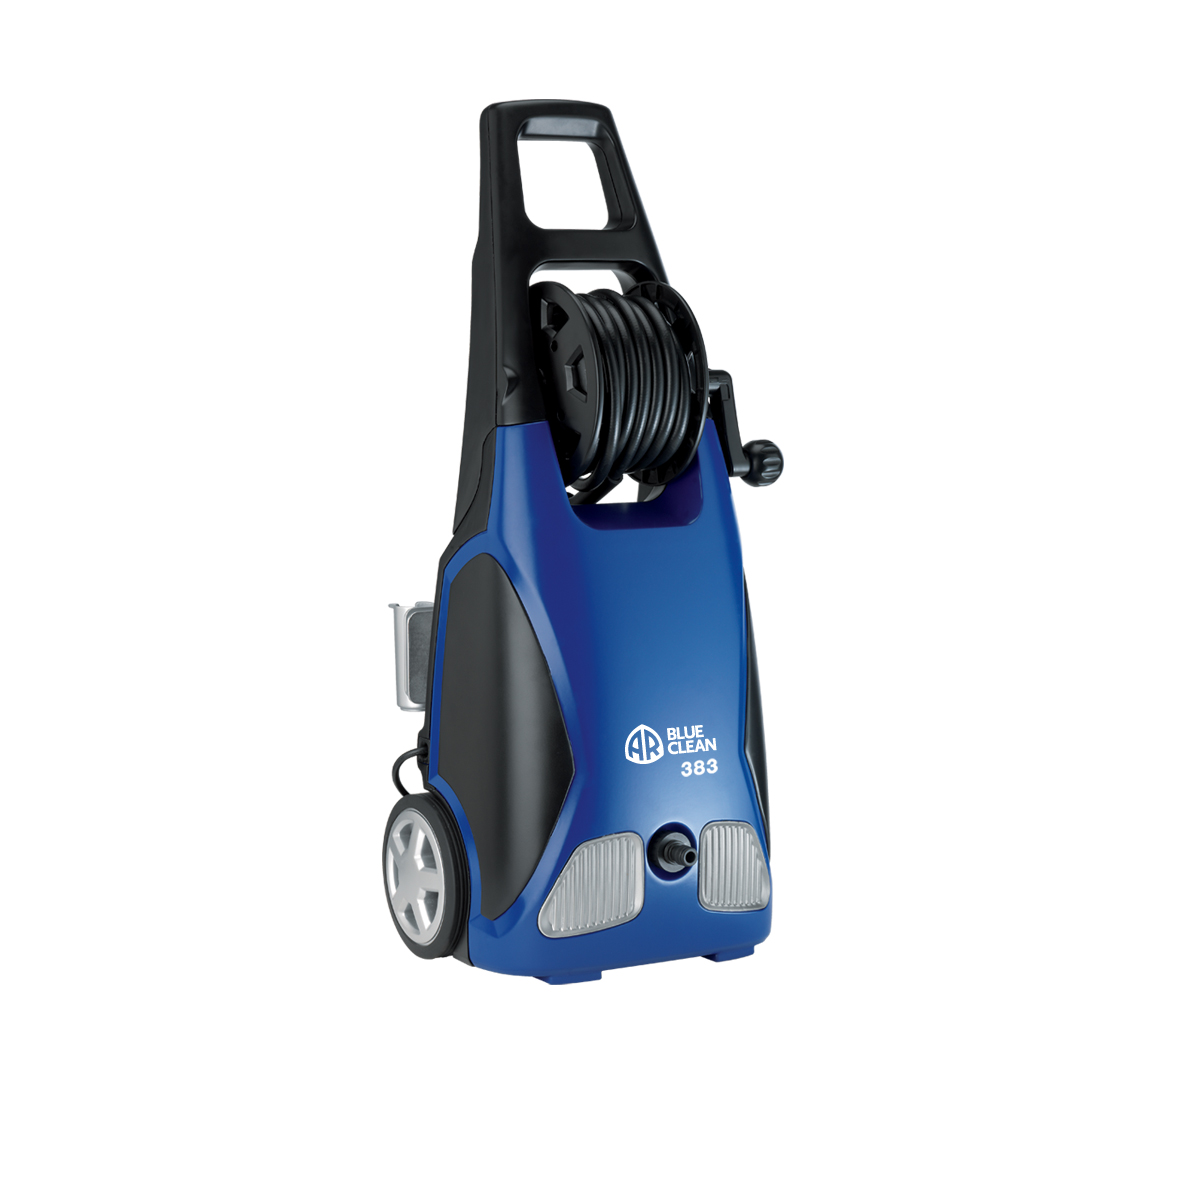 AR Blue Clean AR383 , 1900 PSI, Electric Pressure Washer Questions & Answers